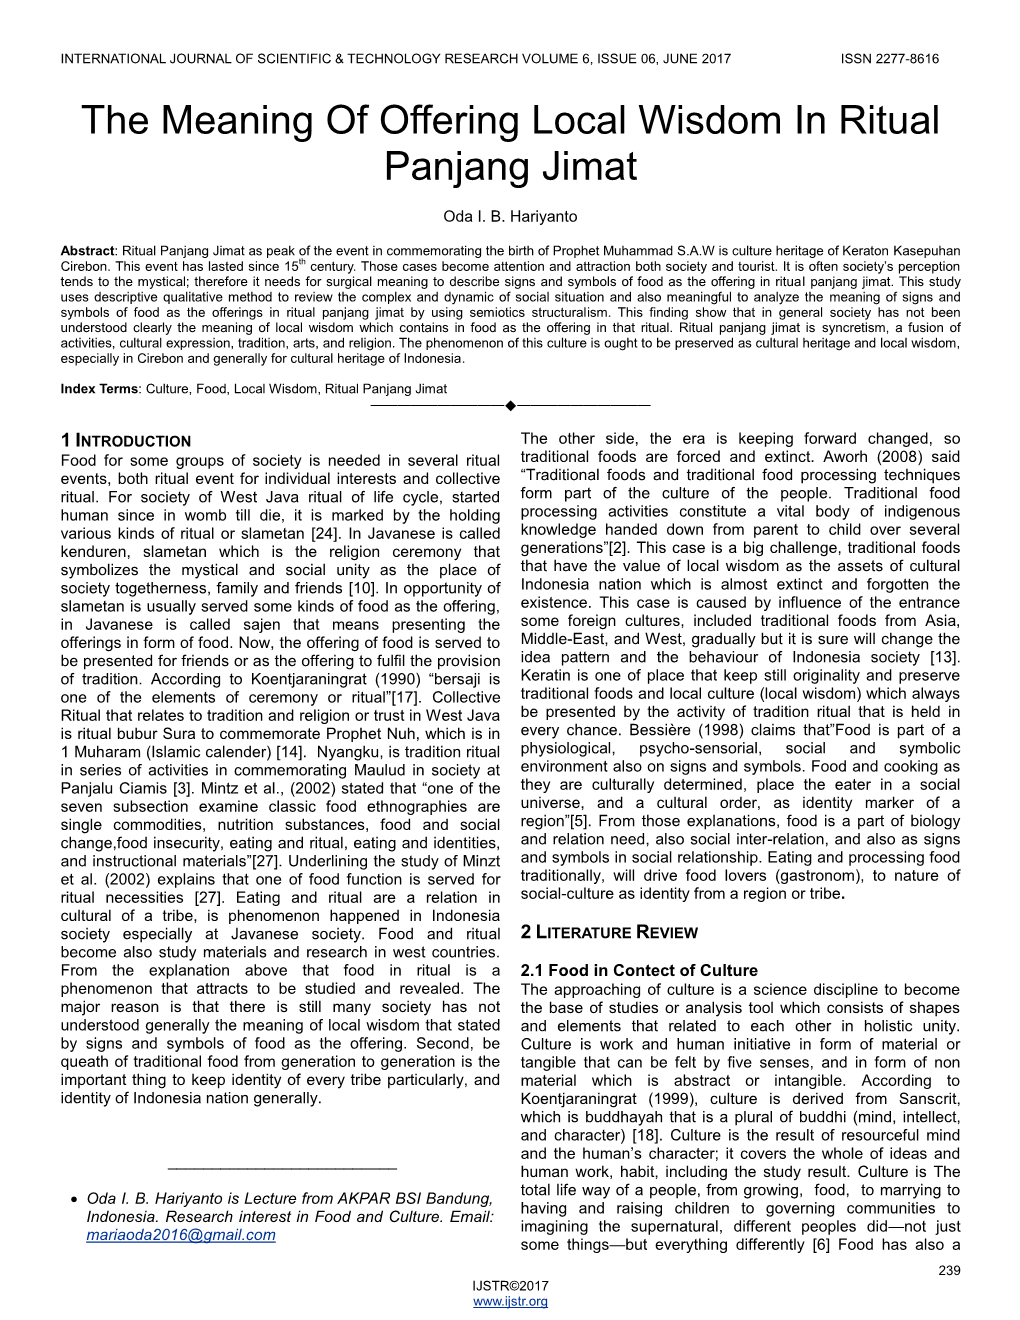 The Meaning of Offering Local Wisdom in Ritual Panjang Jimat